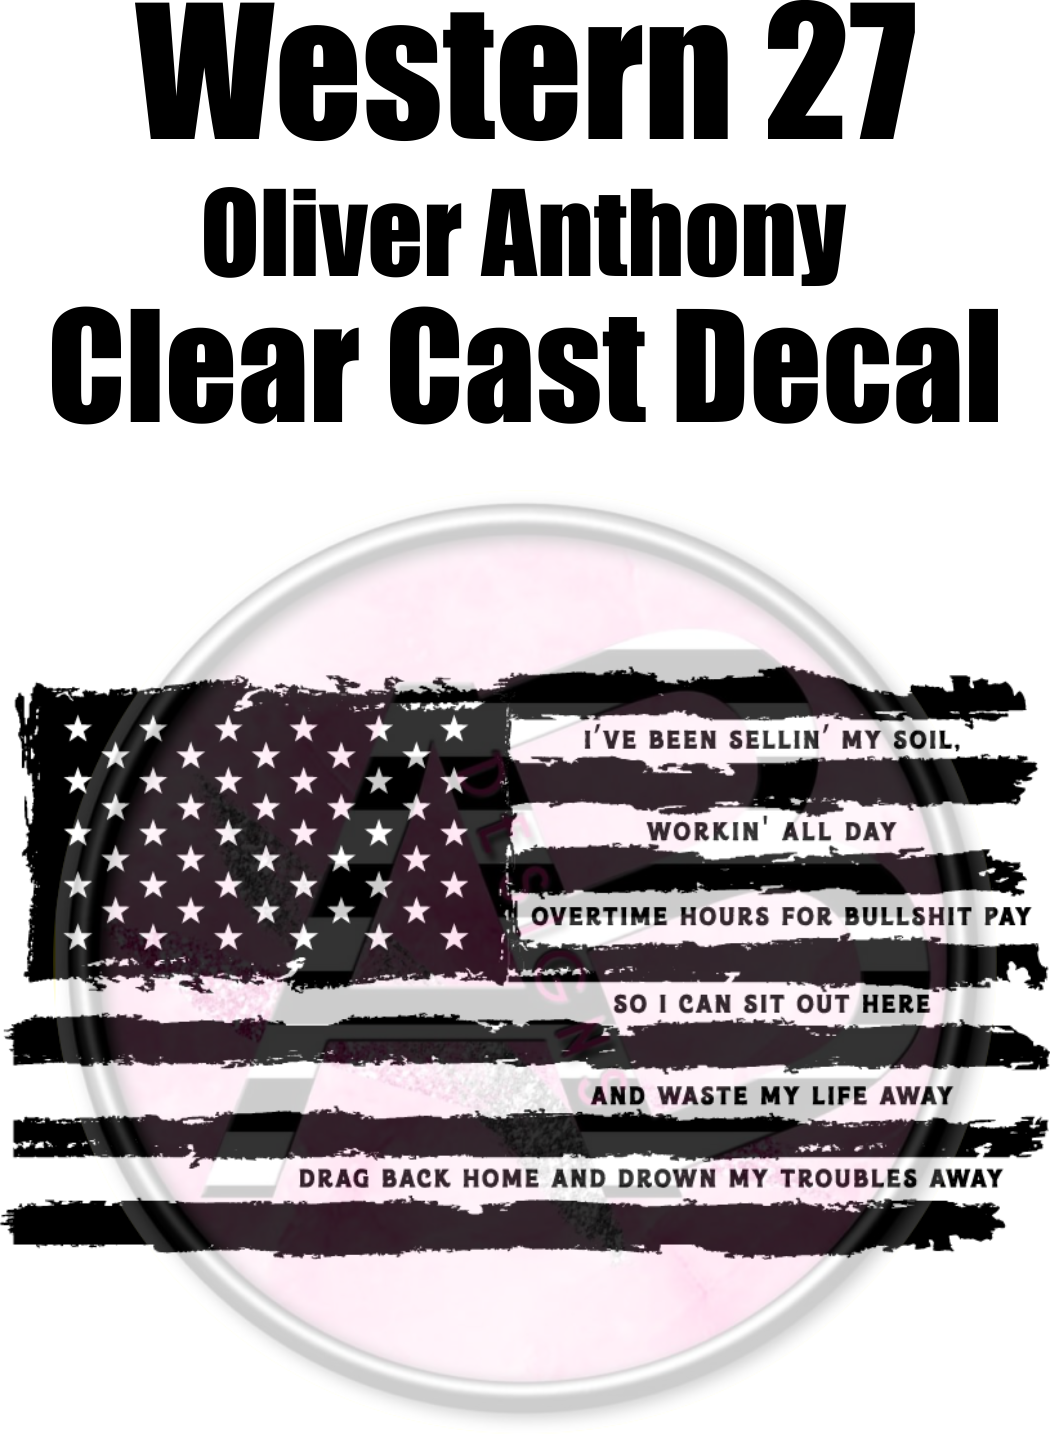 Western 27 - Clear Cast Decal - Oliver Anthony - 144